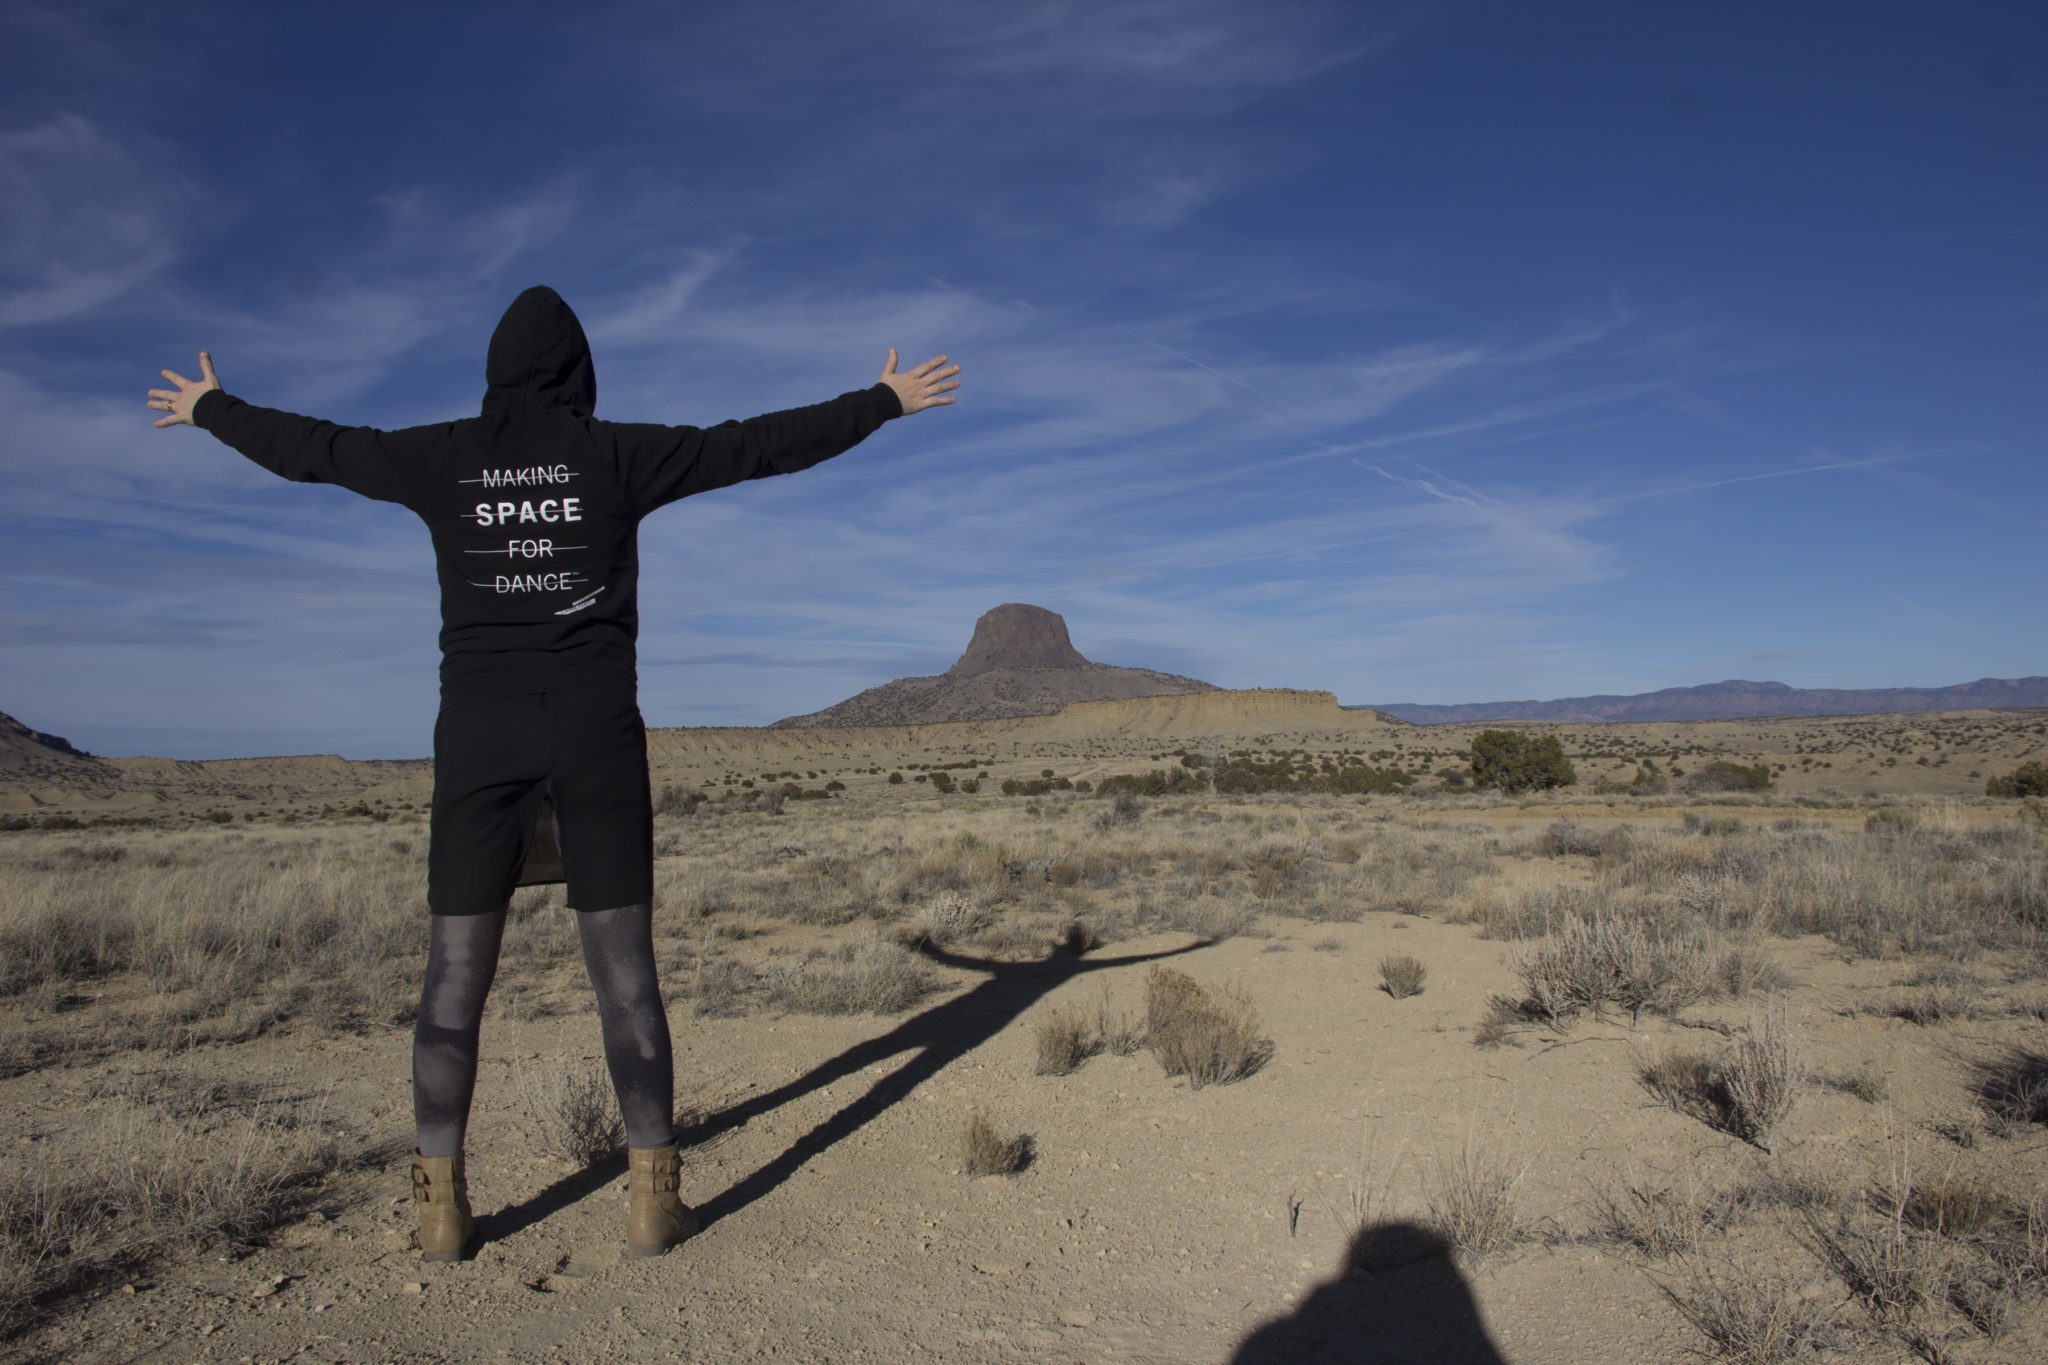 A dancer wearing a black hoodie poses in a desert landscape with a mountain in the distance.